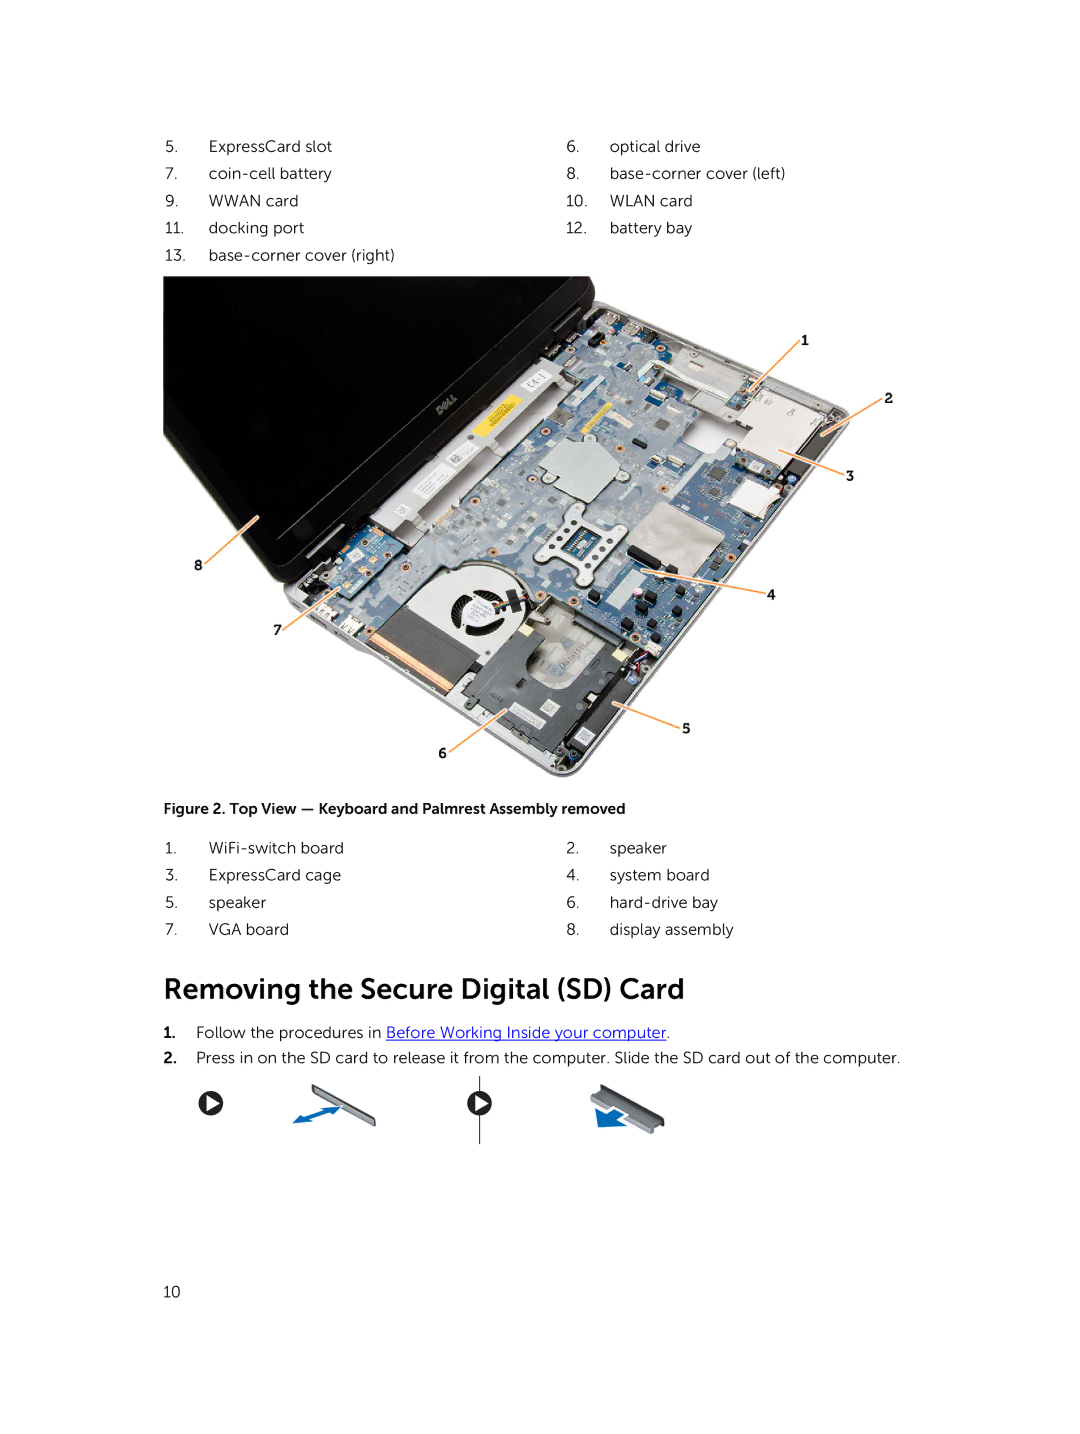 Dell M2800 owner manual Removing the Secure Digital SD Card, Follow the procedures in Before Working Inside your computer 